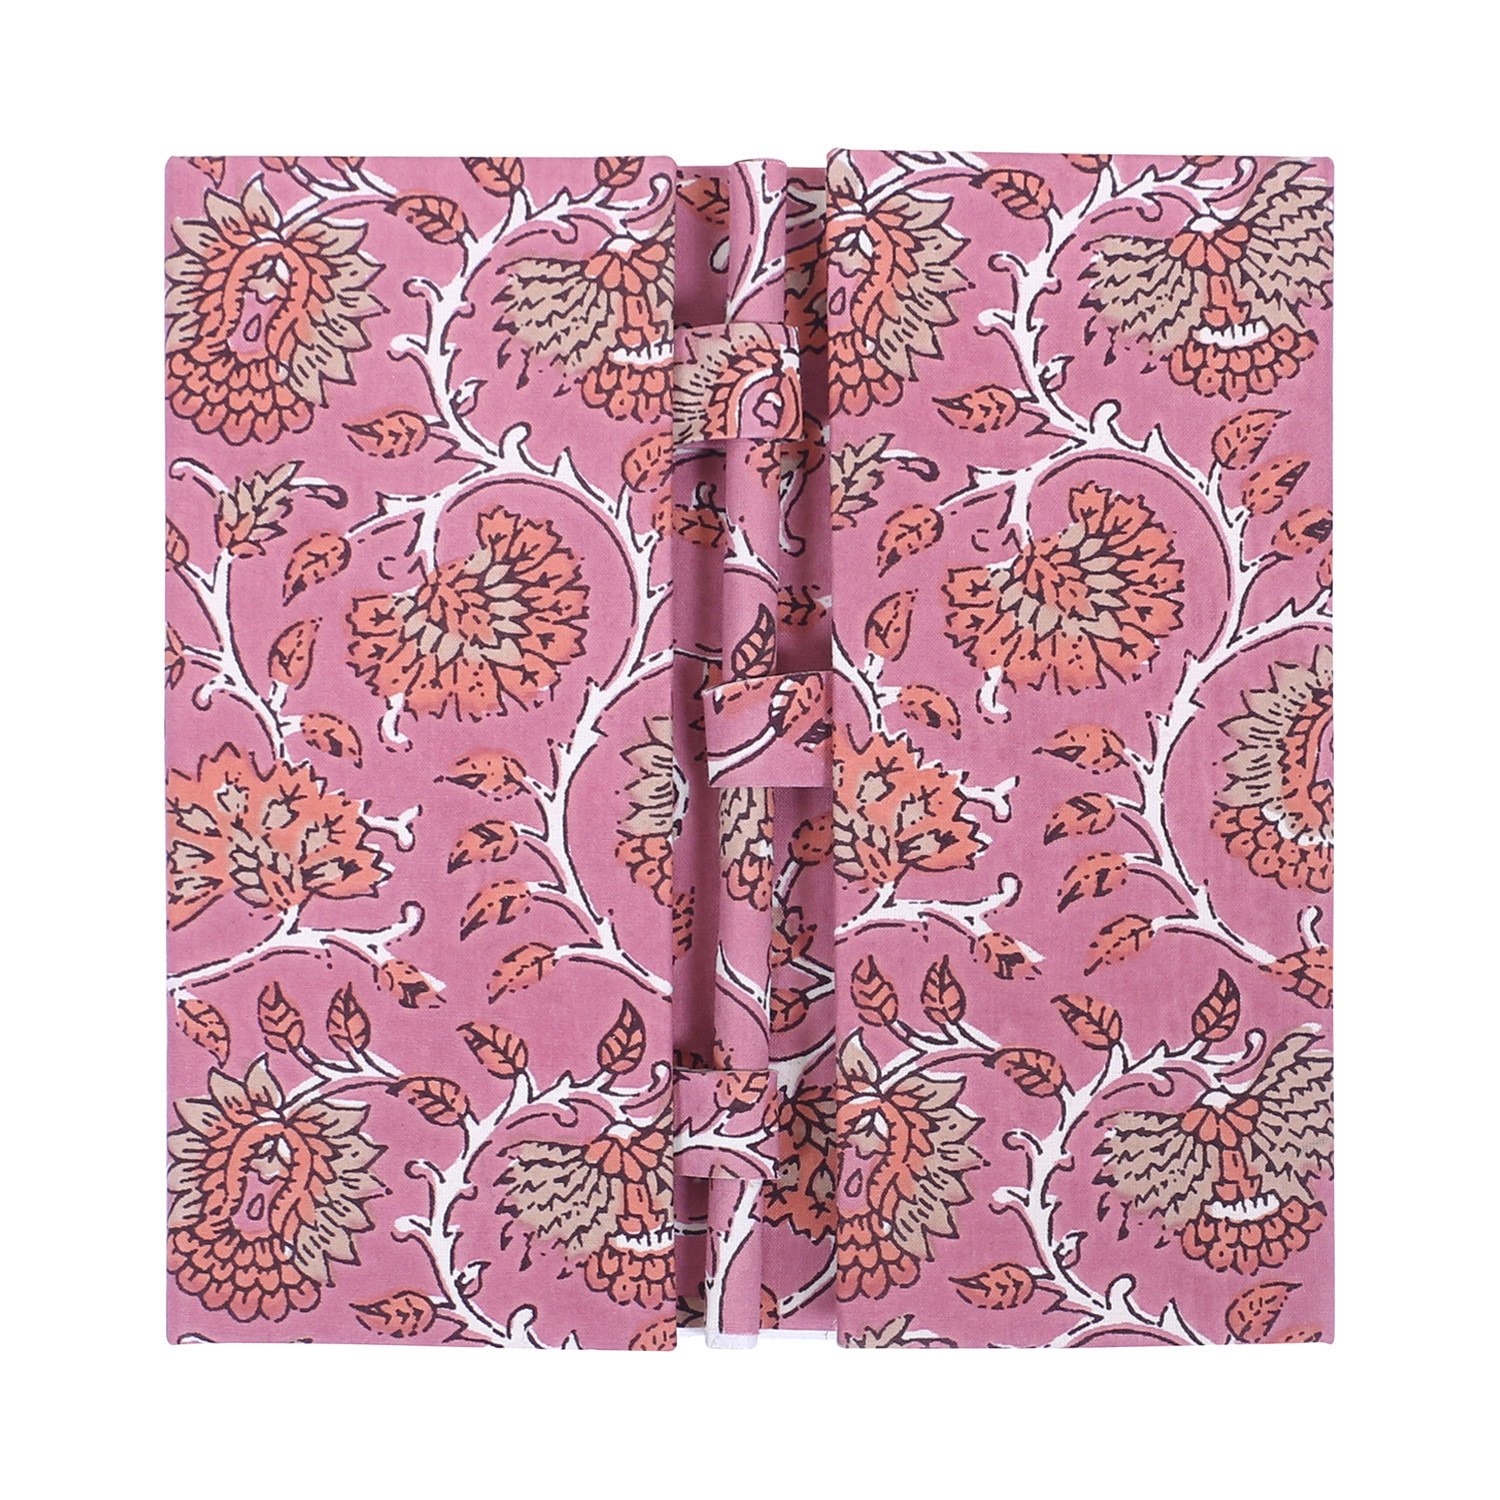 Kuber Industries Diary | Cardboard Travel Notebook | Diary for Journey | Leaf Pen-Diary | Diary for Writing Thoughts & Memories | Relieve Stress | Light Pink